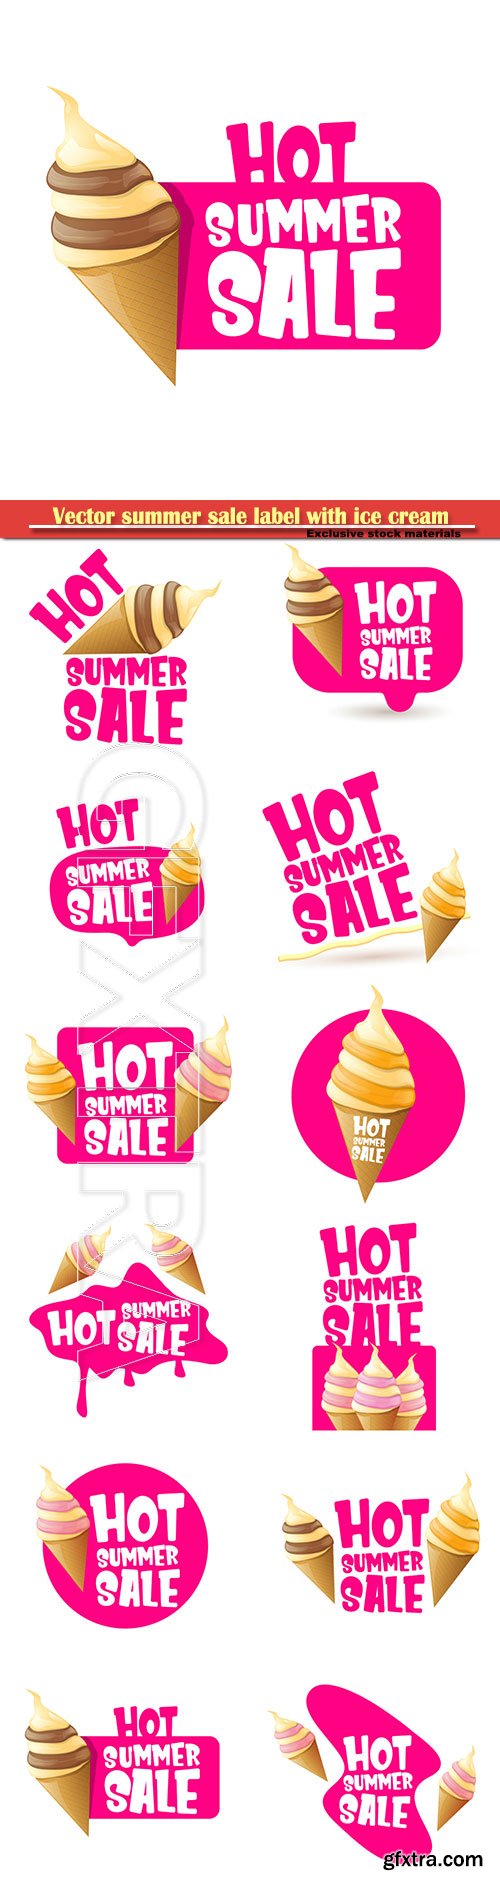 Vector summer sale label with melting ice cream